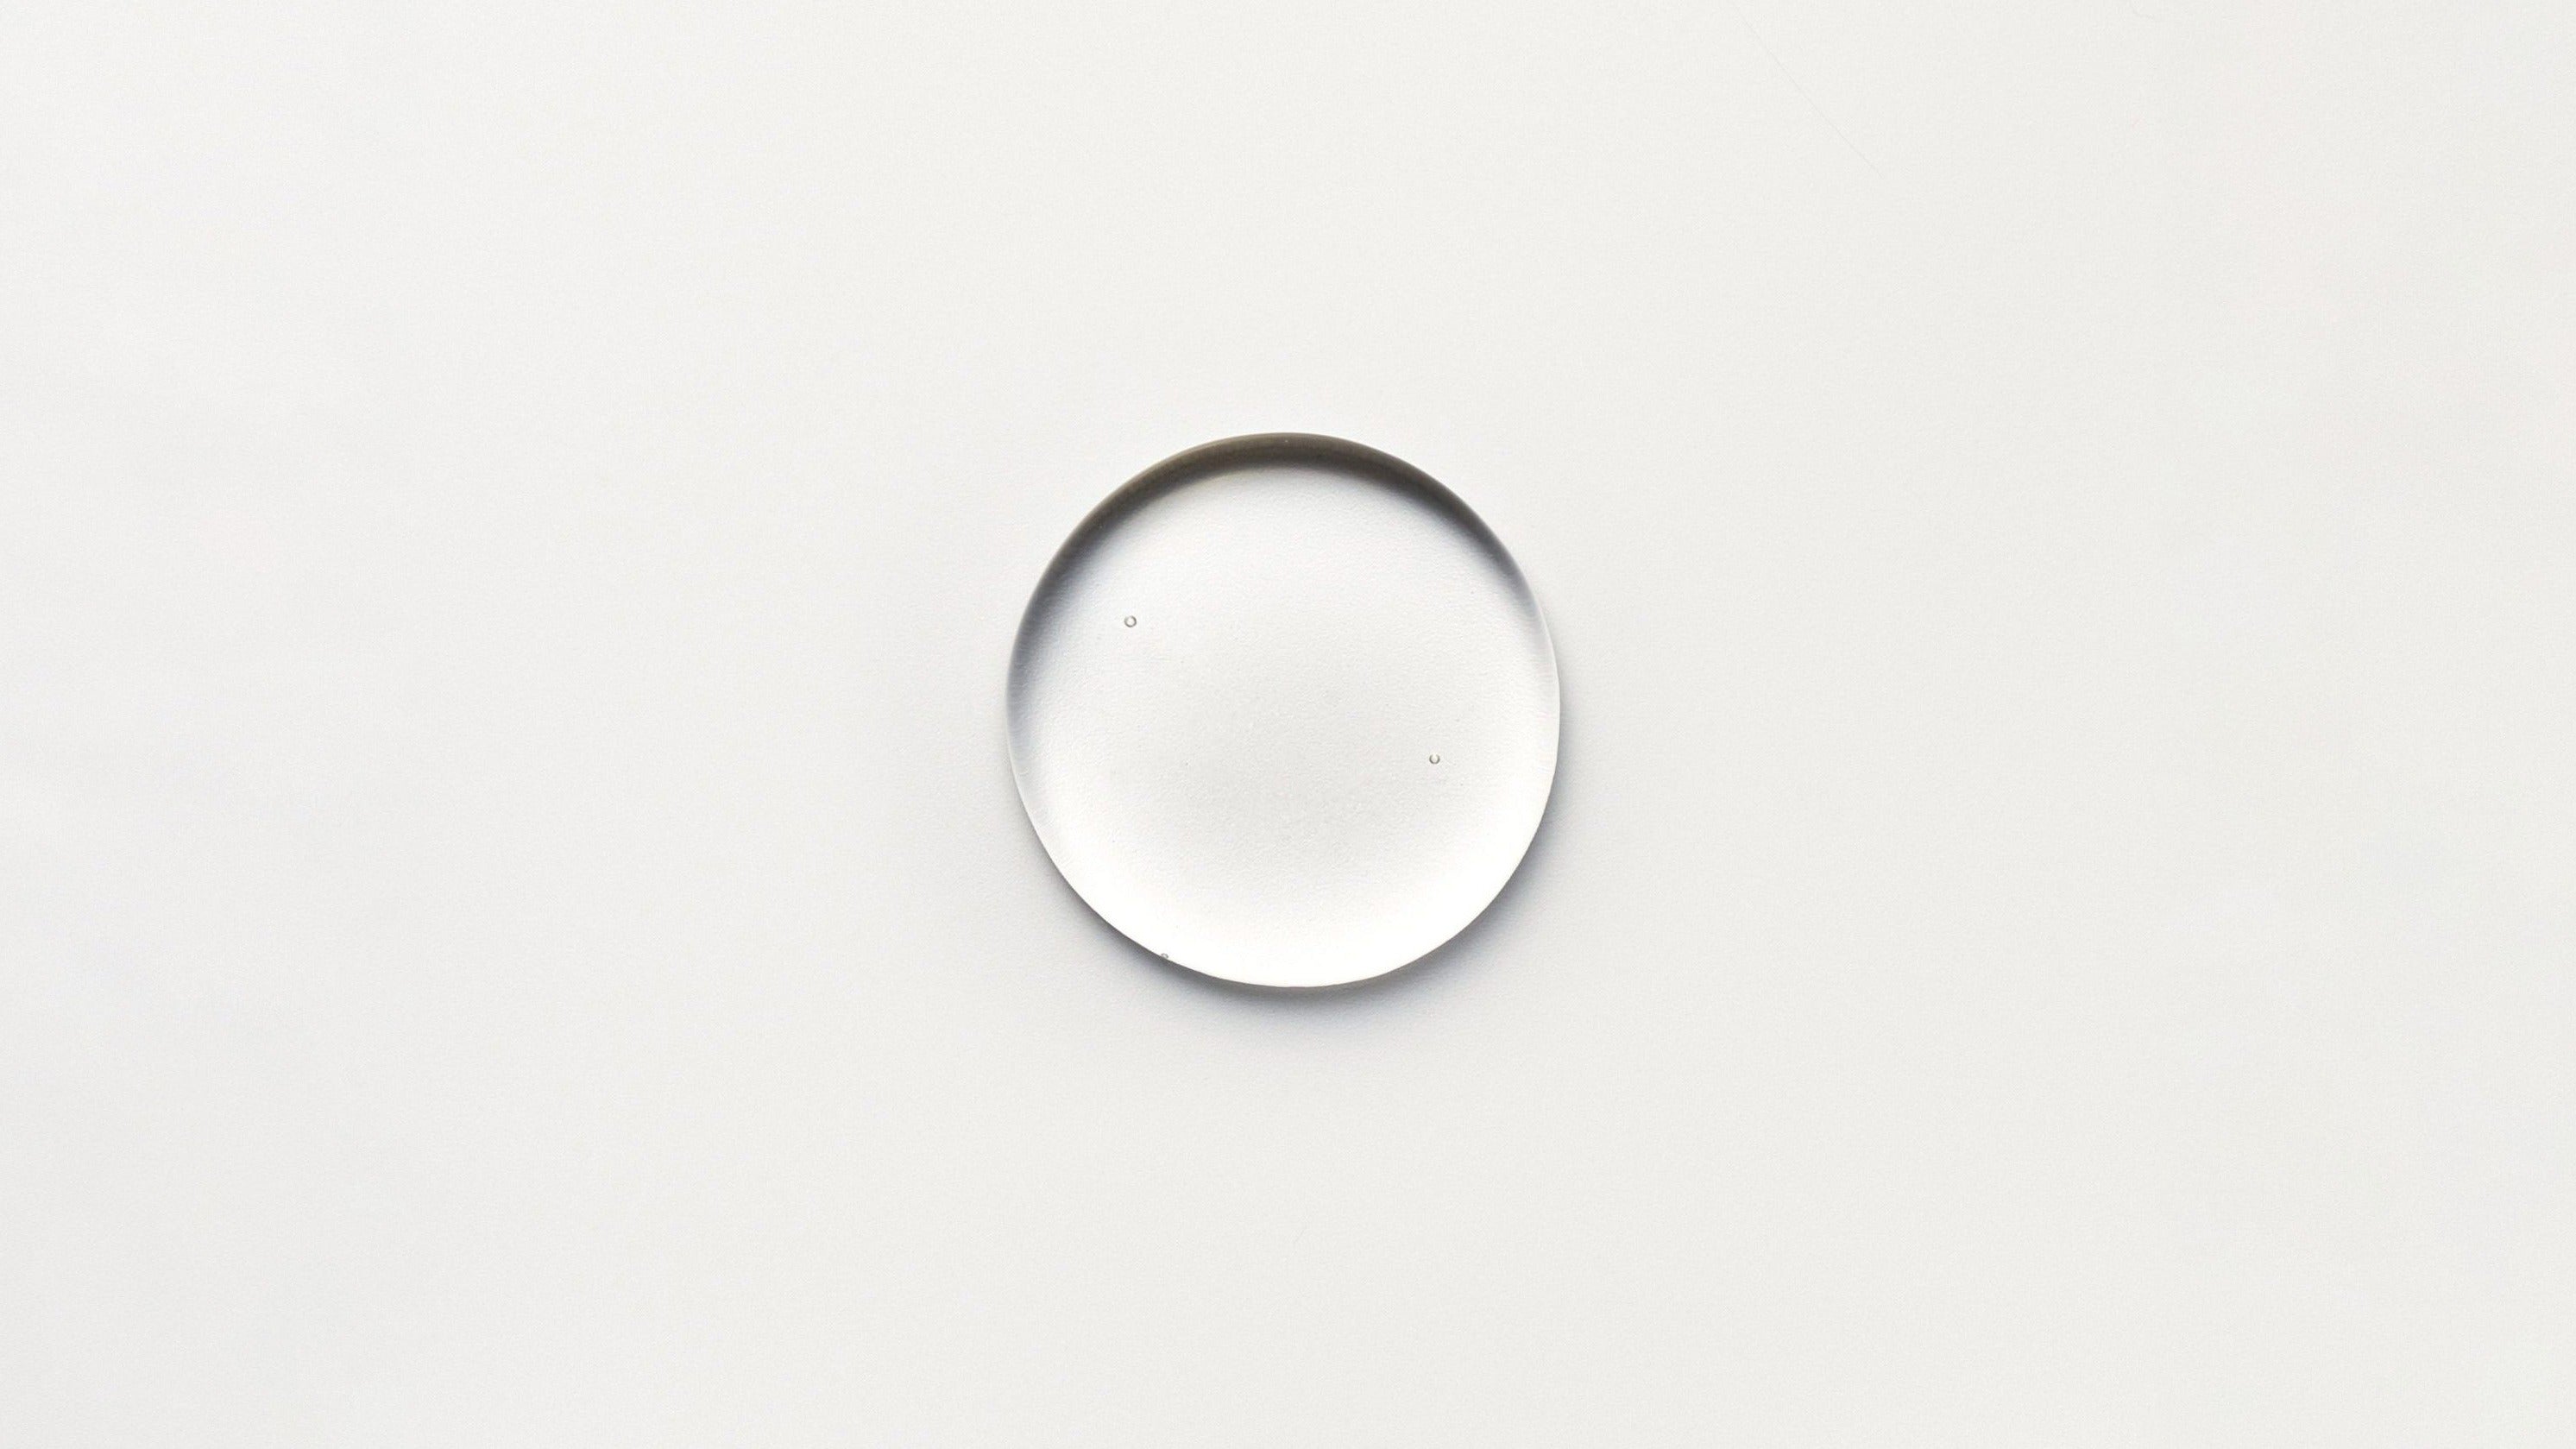 a photo of the hydrolytic serum droplet on a white background